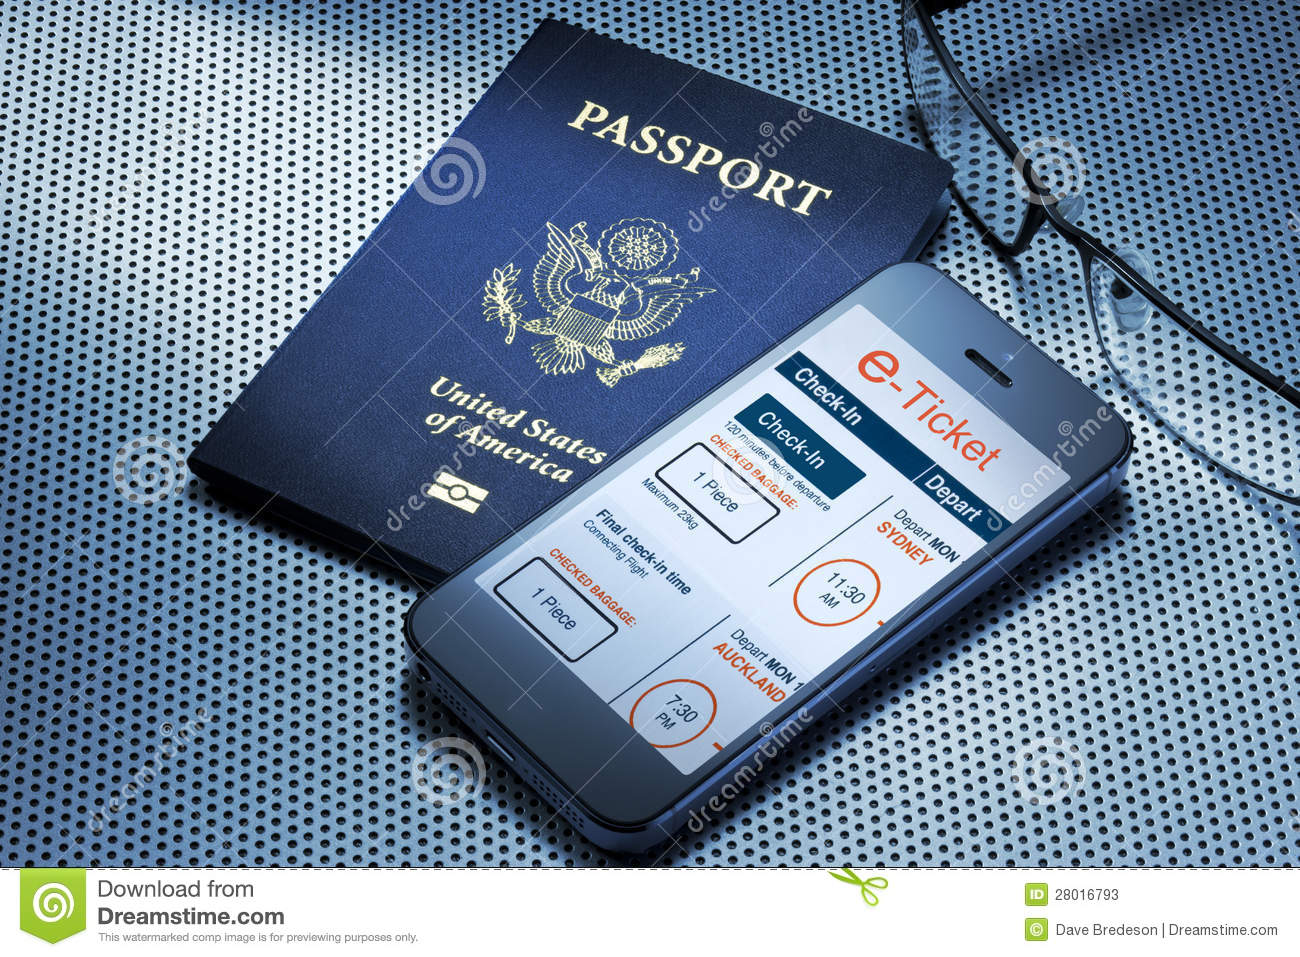 Example of hashing versus encryption is found in electronic passports. Image Credit: Dreams Time